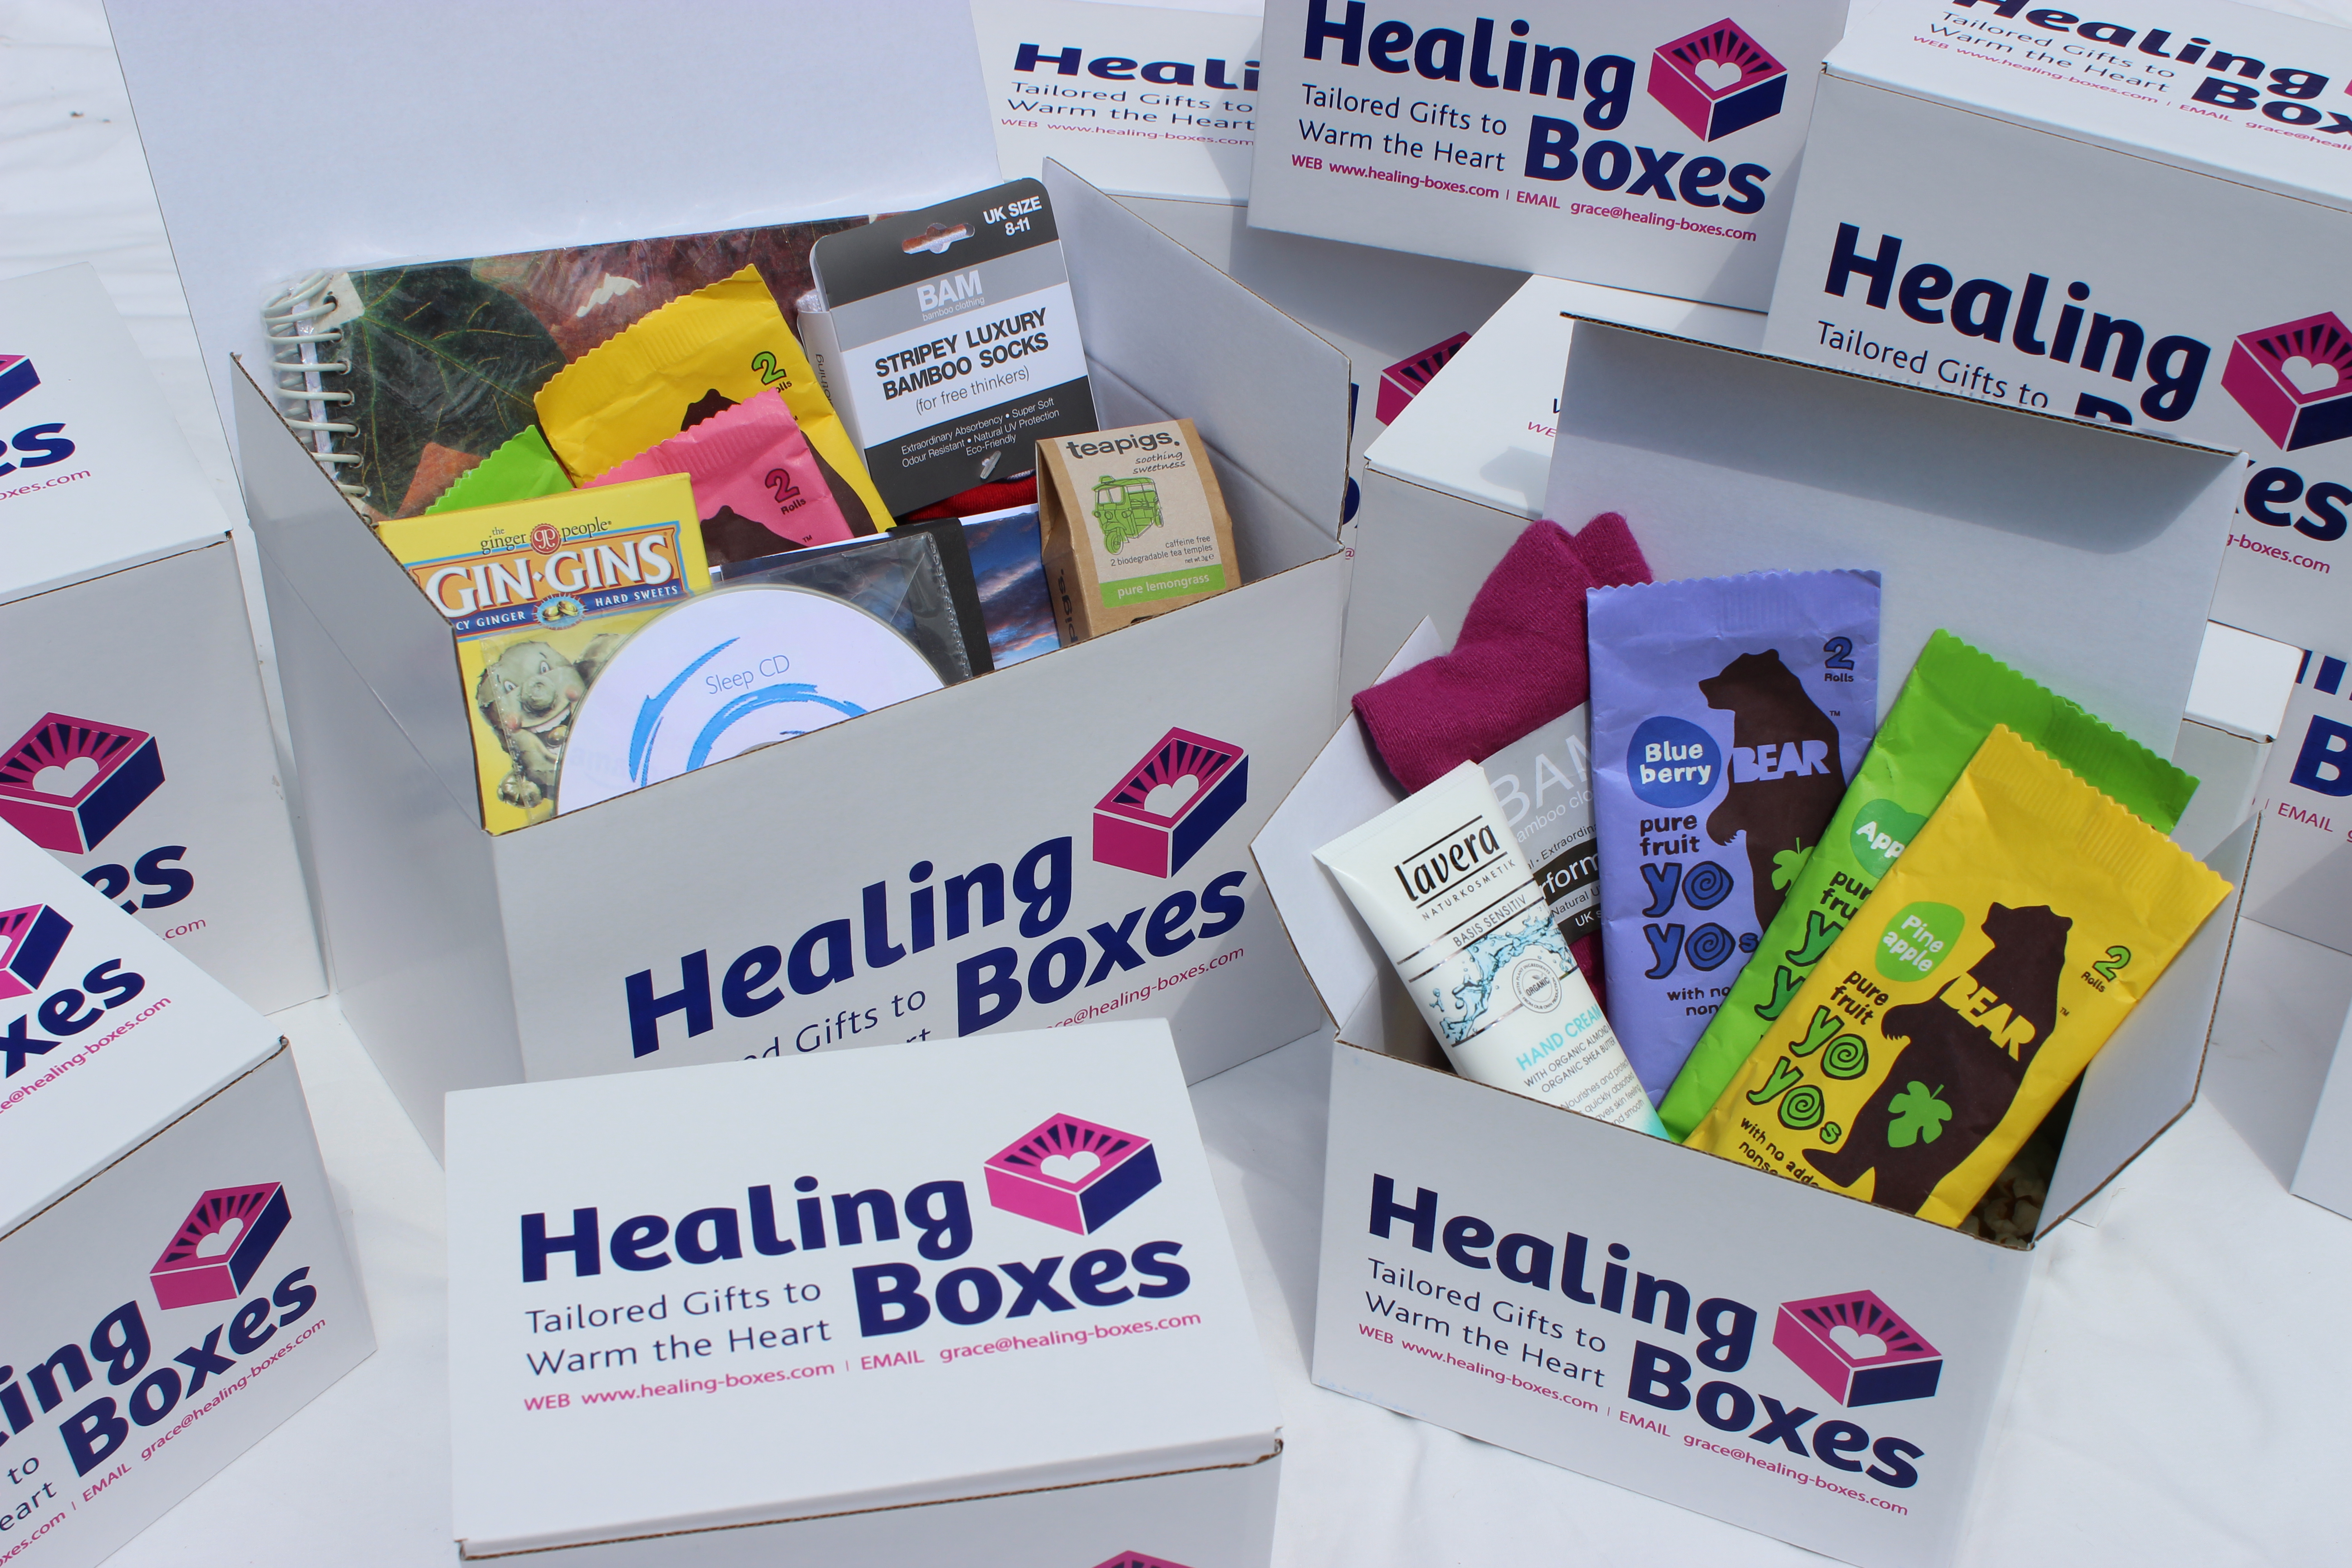 healing boxes hospital gifts multiple boxes image